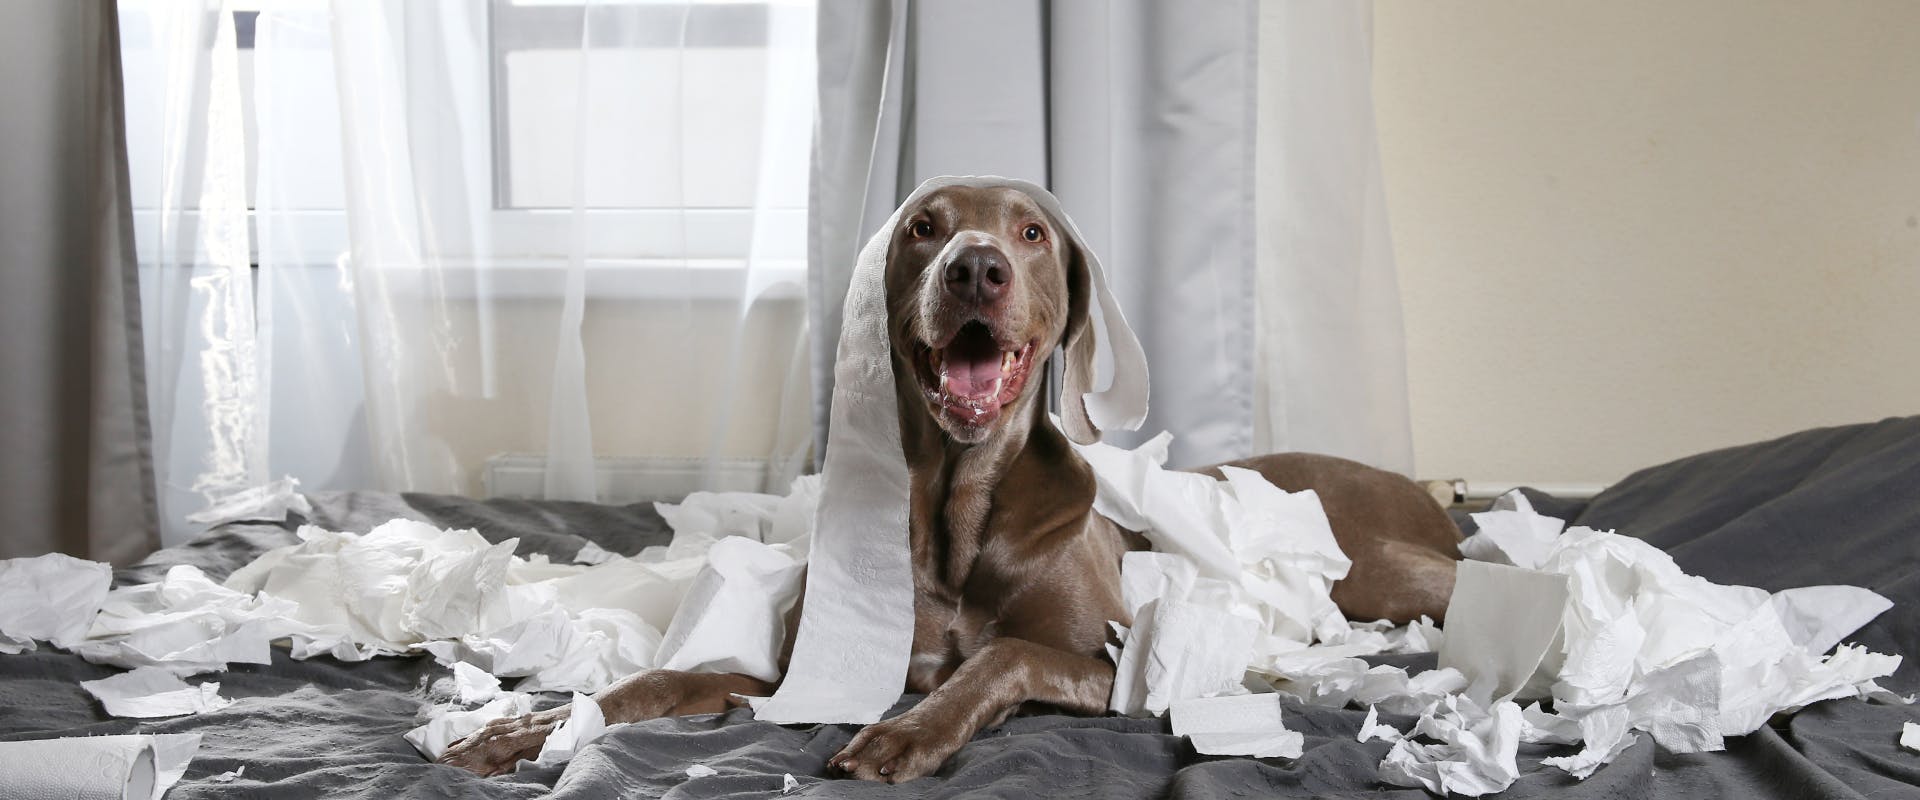 a large gray dog lying on a bed covered in ripped up toilet paper